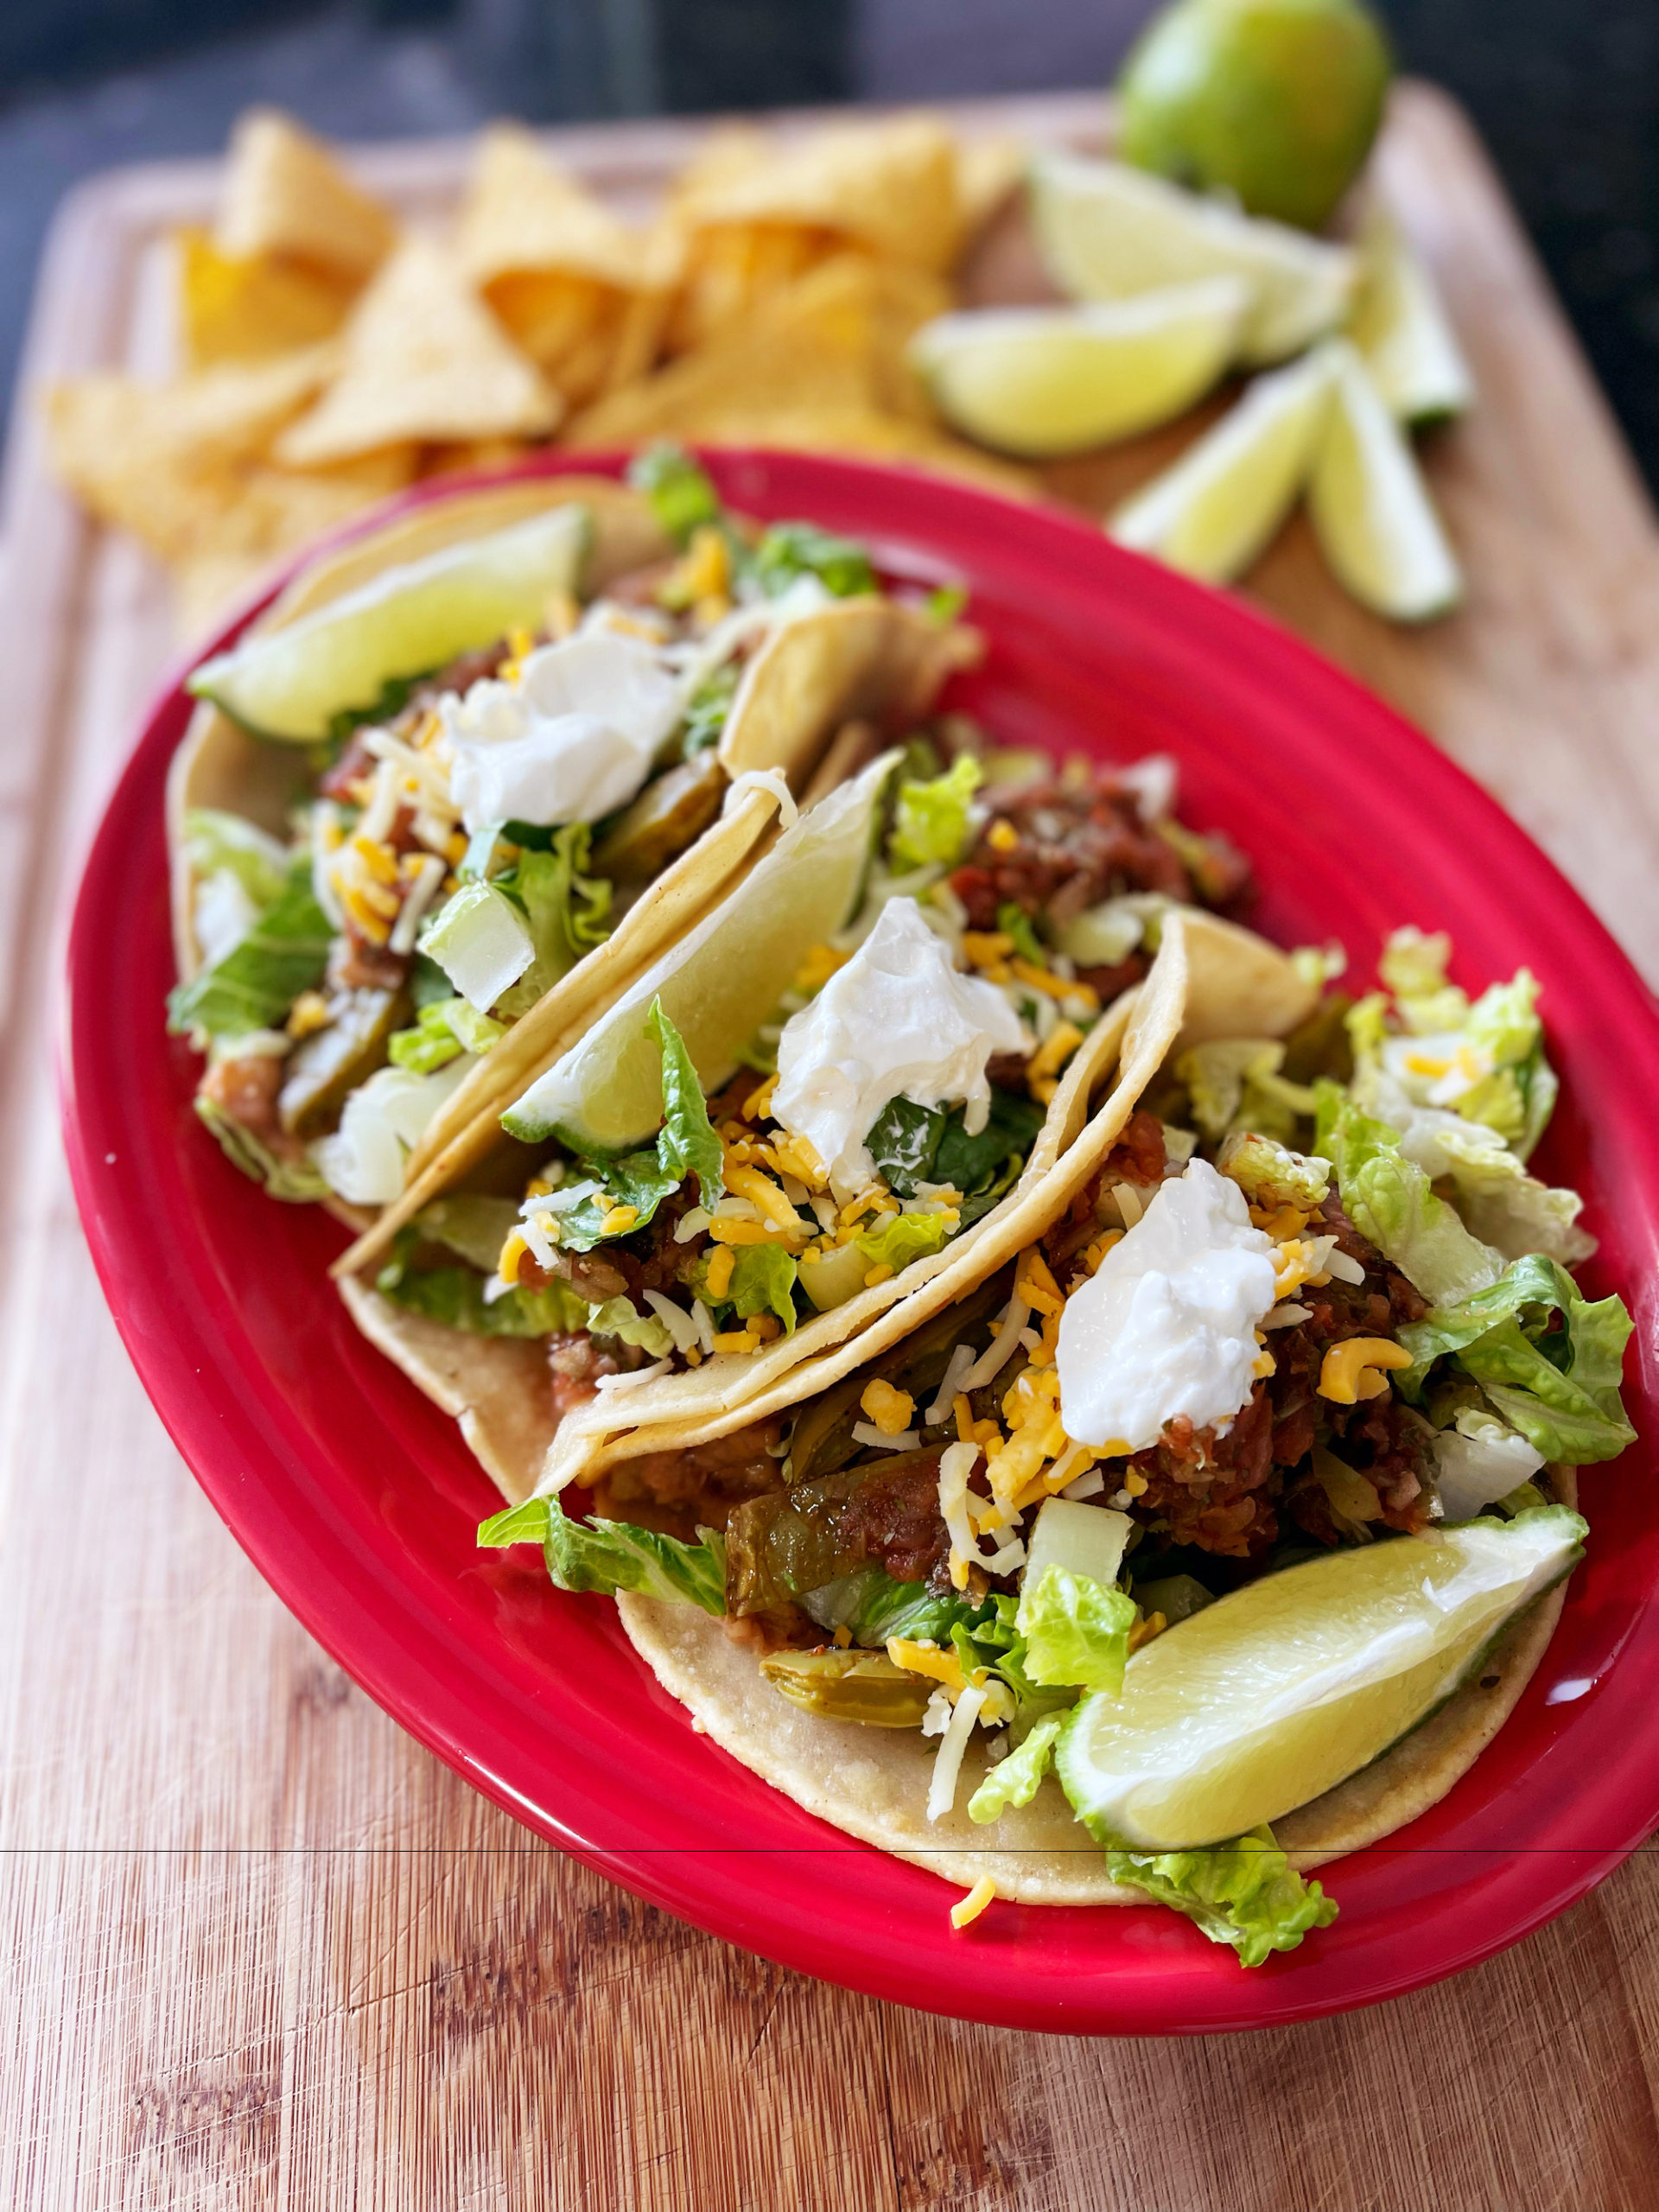 Skirt Steak Tacos with Grilled Nopales - cooking with chef bryan